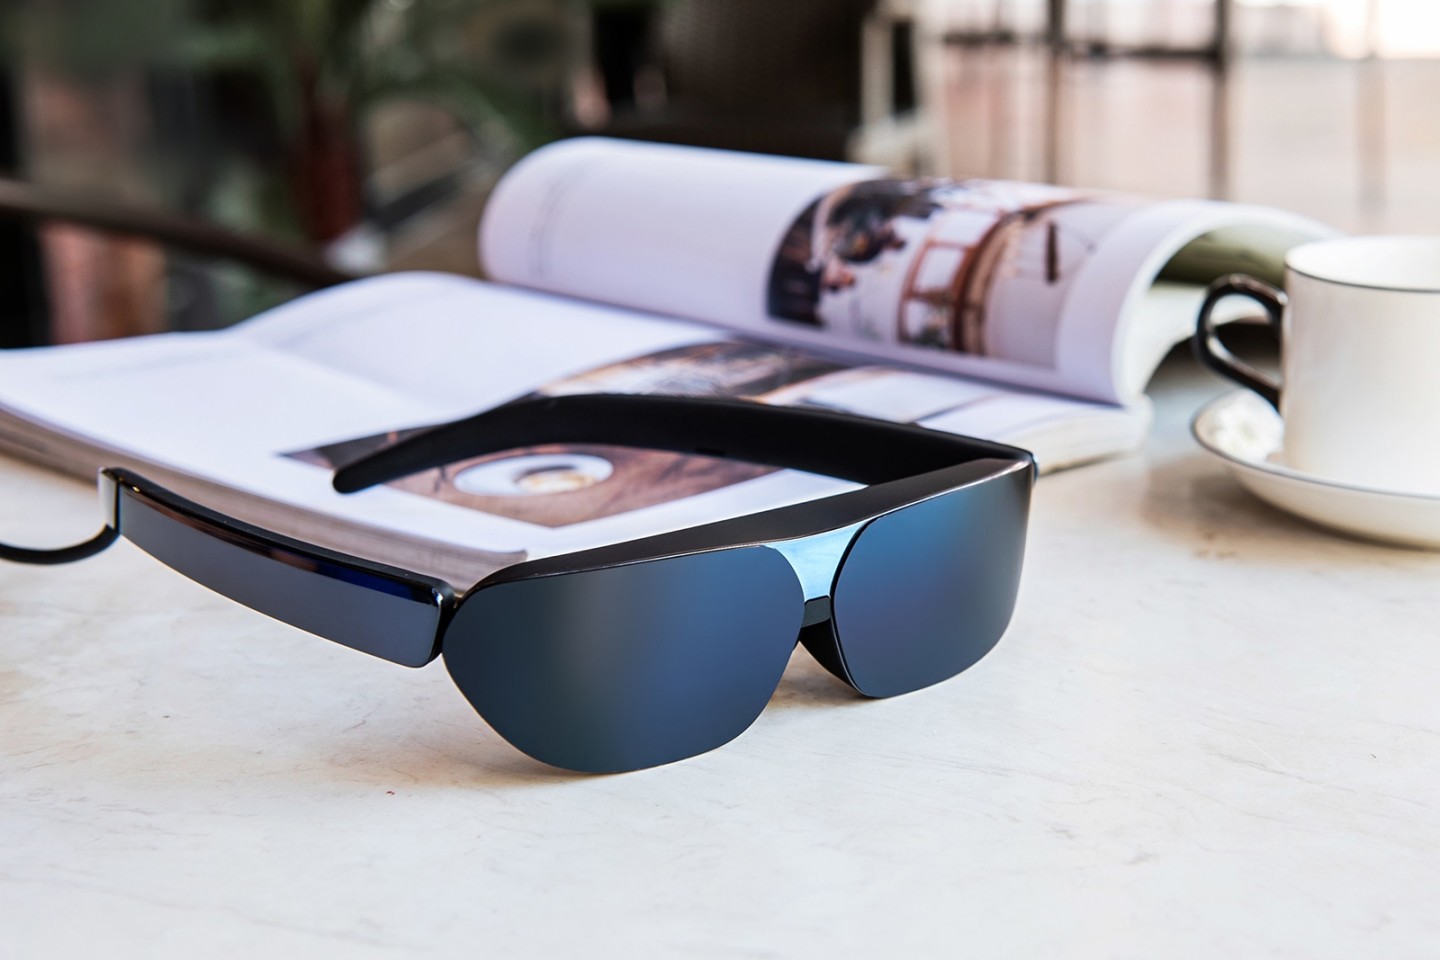 The NXTWEAR G specs are powered by a phone, tablet, or laptop